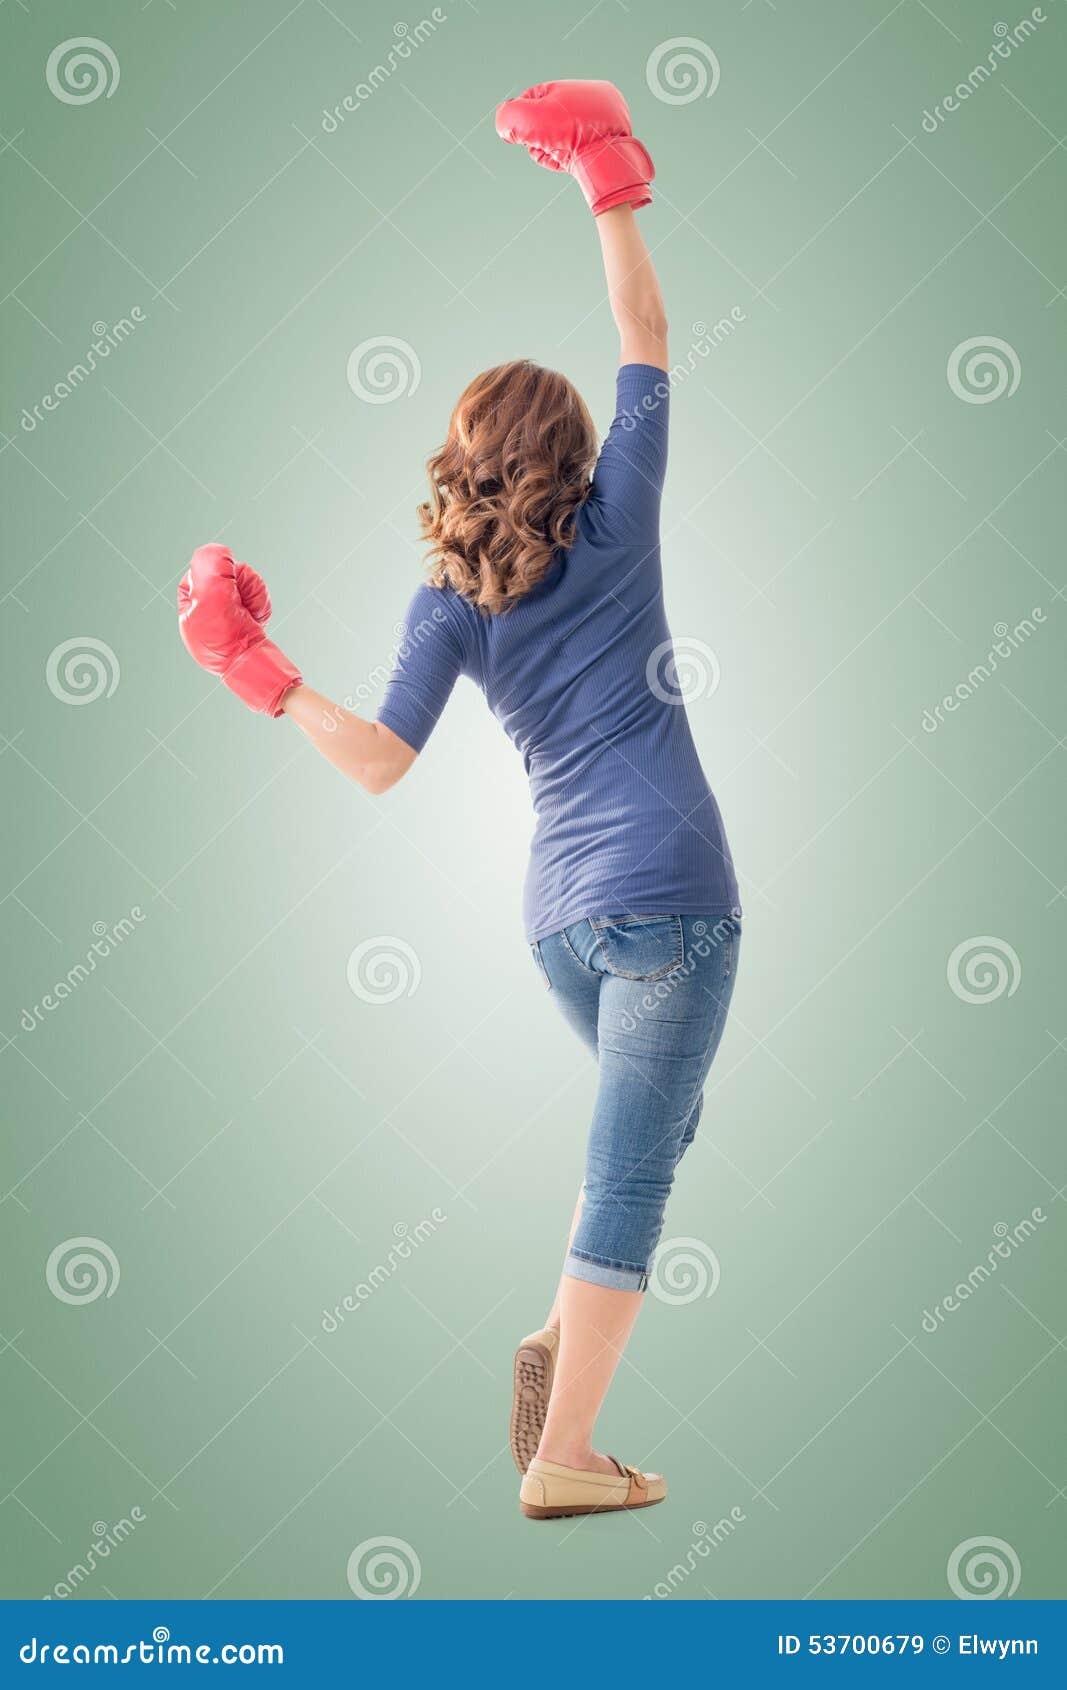 Fighting girl concept stock image. Image of boxing, fight - 53700679